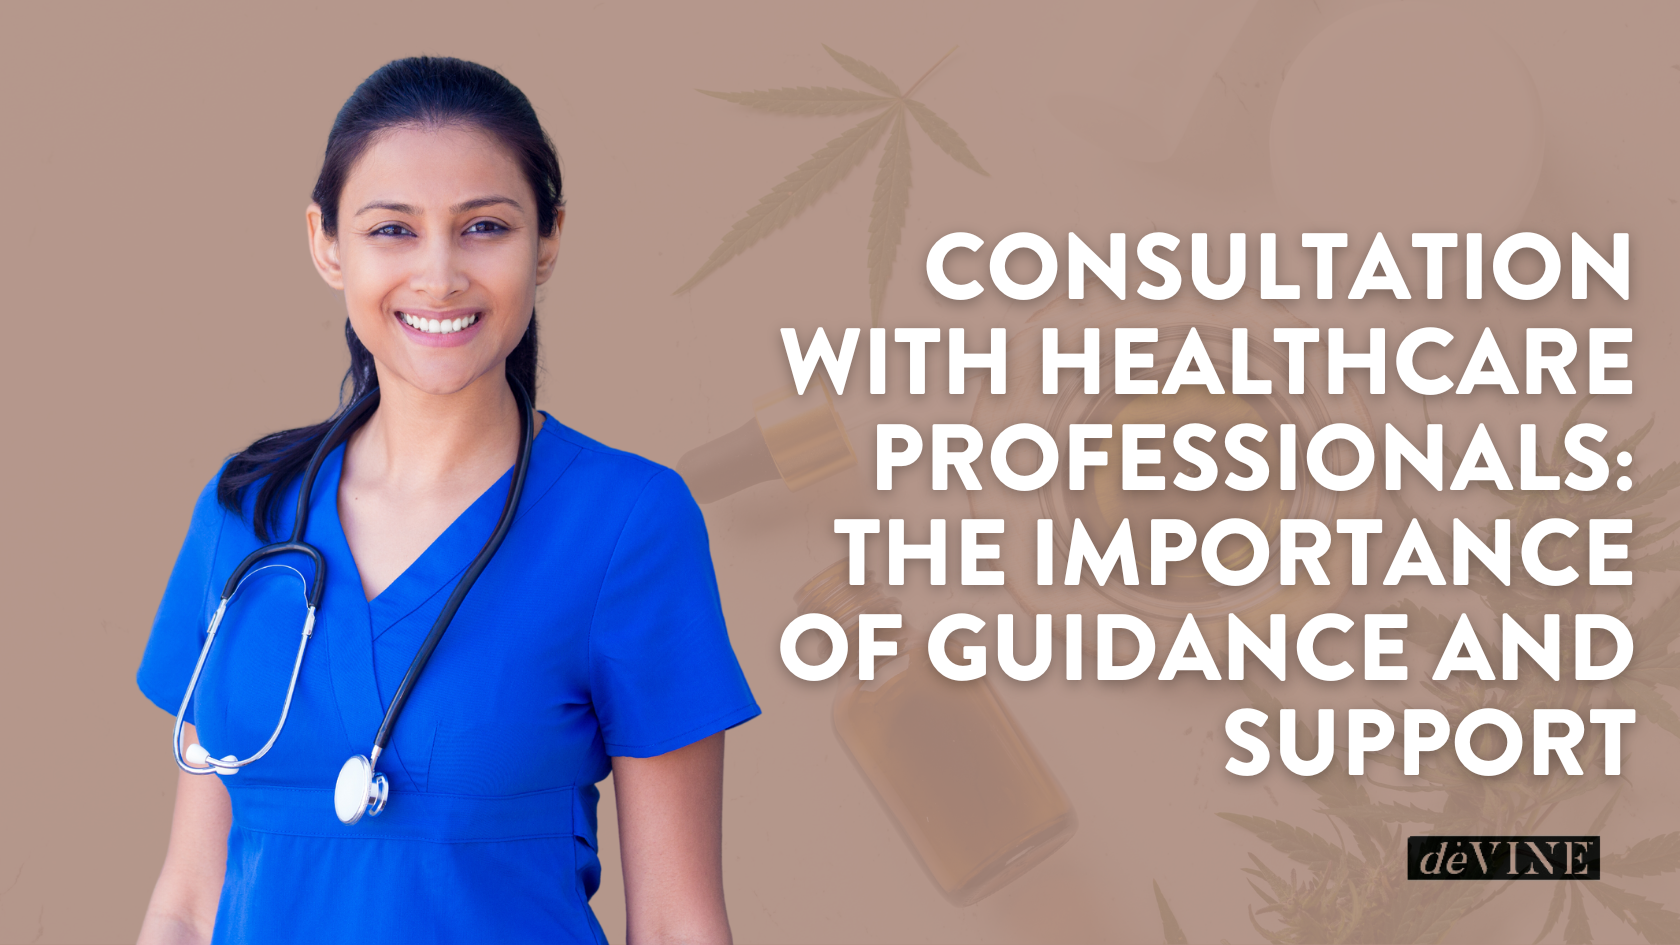 Consultation with Healthcare Professionals: The Importance of Guidance and Support